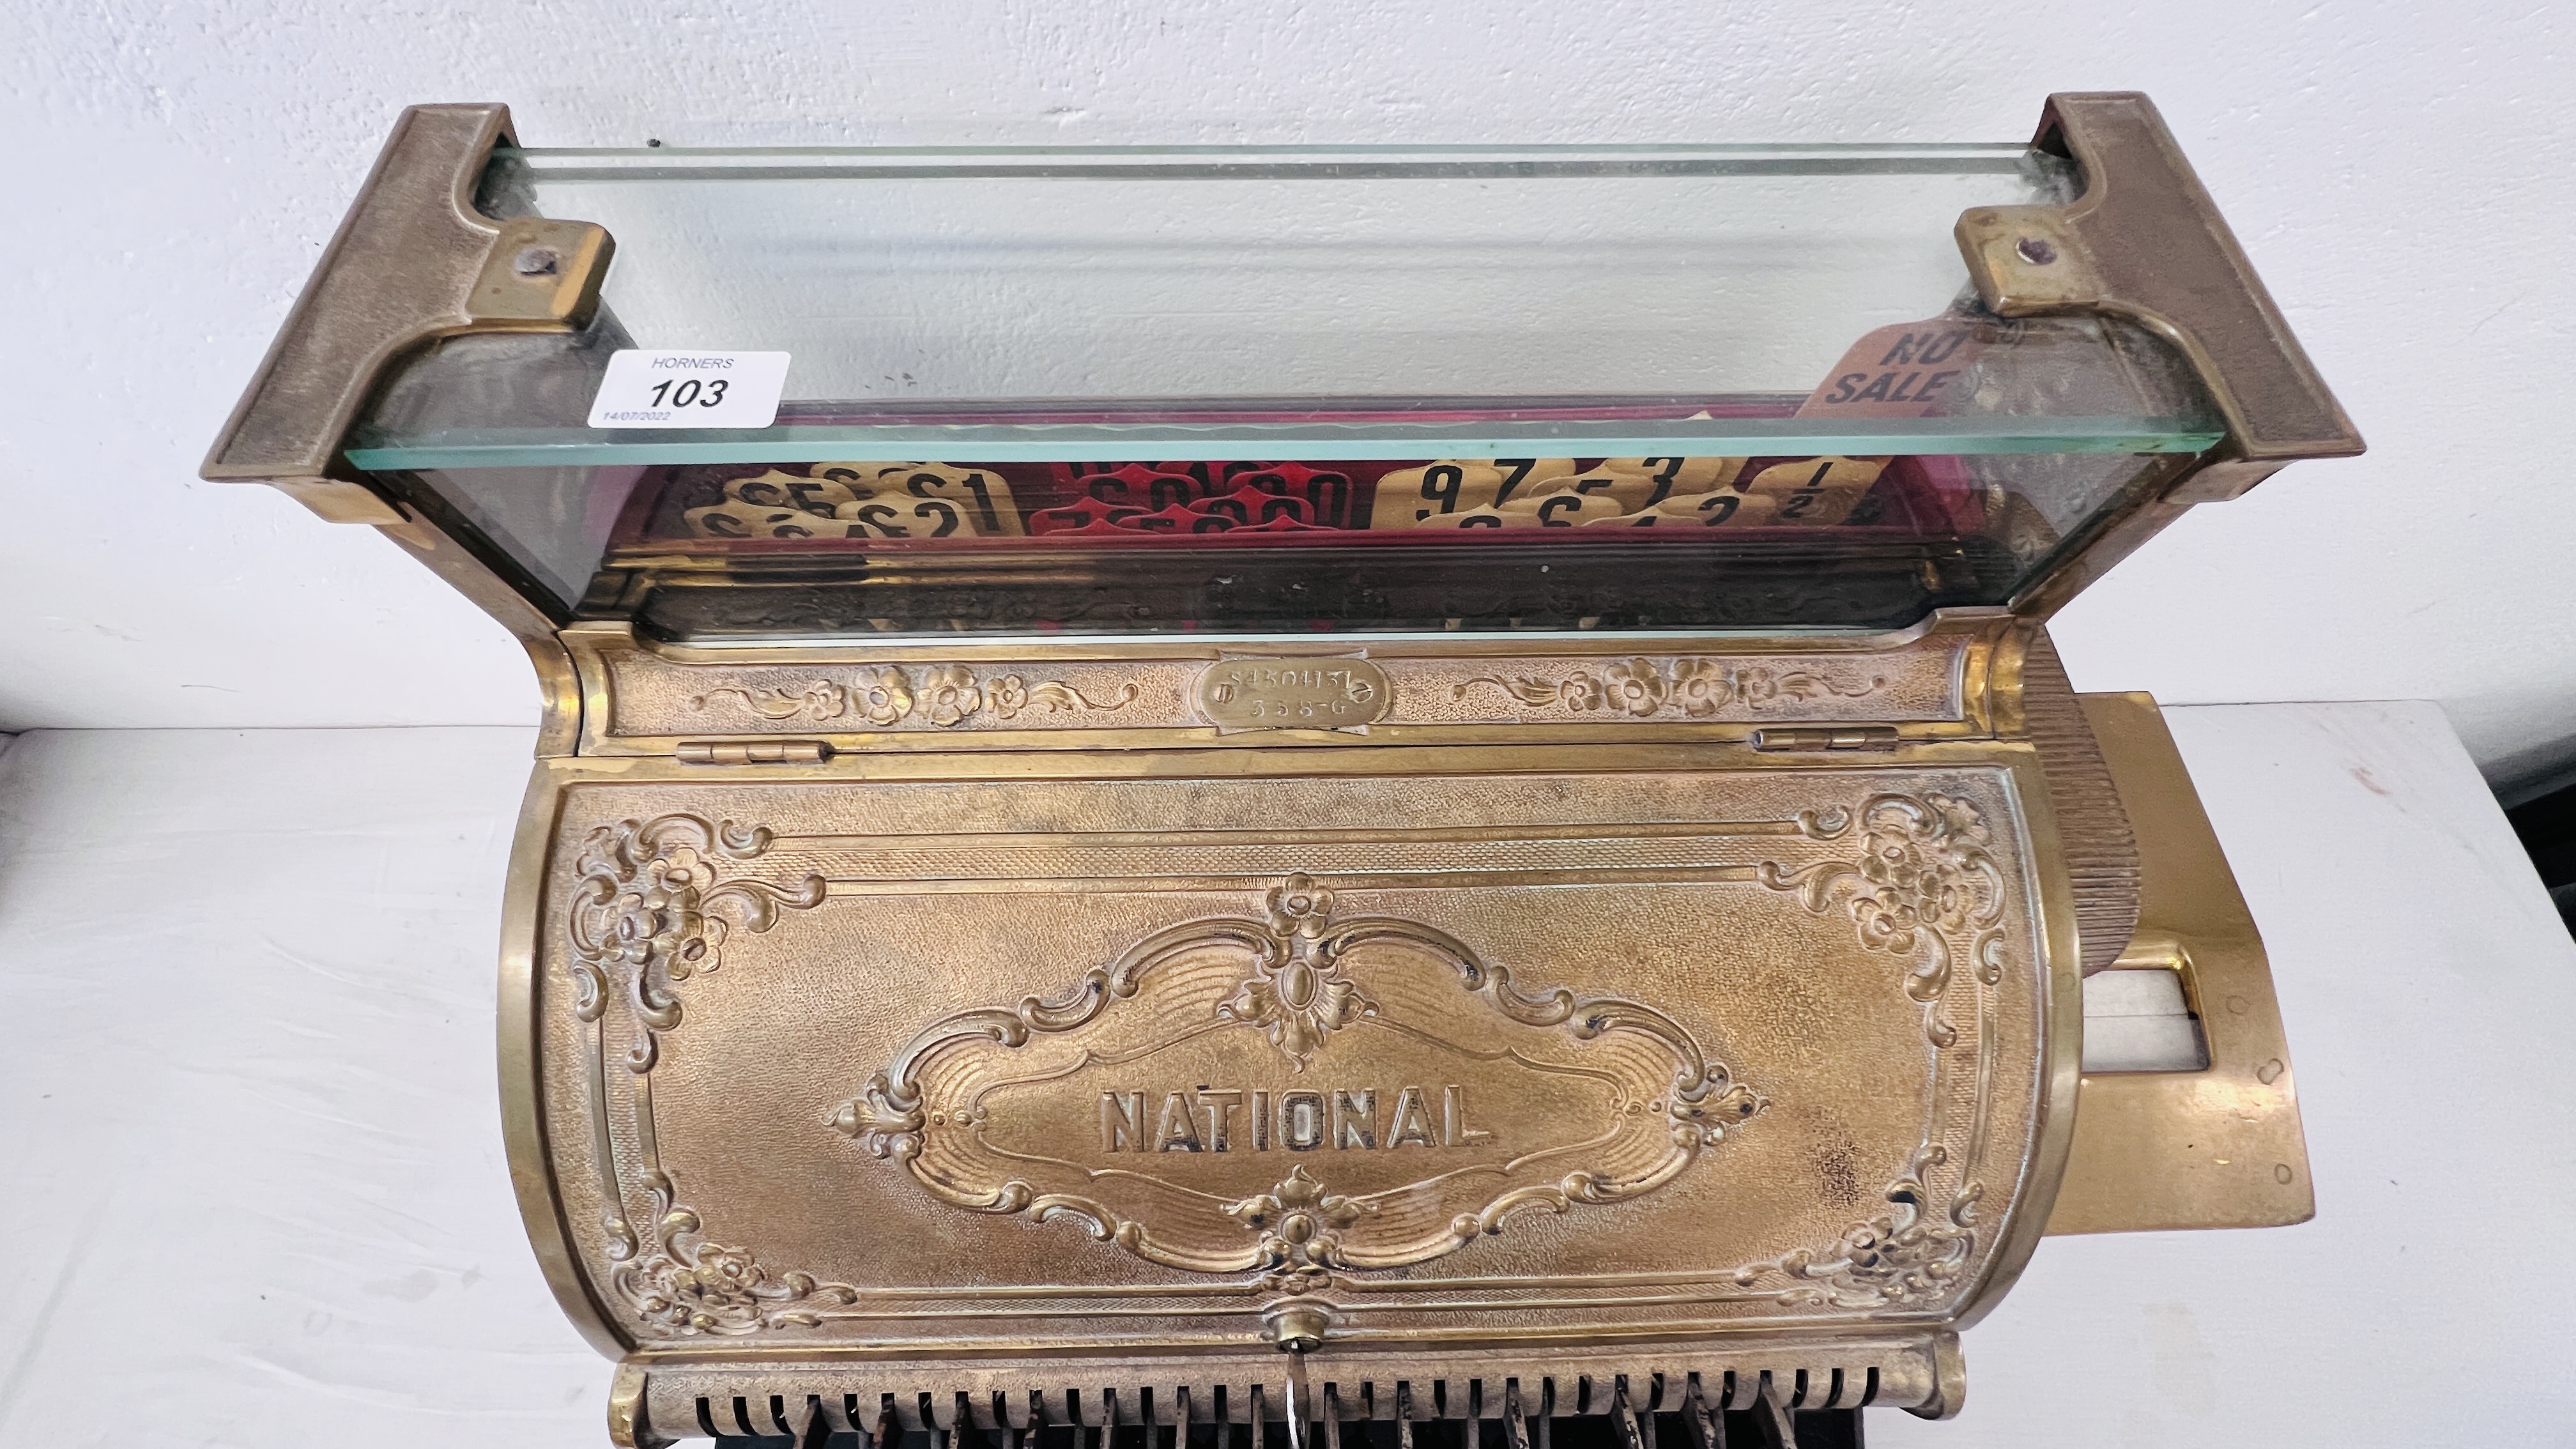 A LARGE 19TH CENTURY NATIONAL CASH REGISTER BRASS TILL - WIDTH 55CM BEARING PLAQUE S4504131358-G. - Image 4 of 24